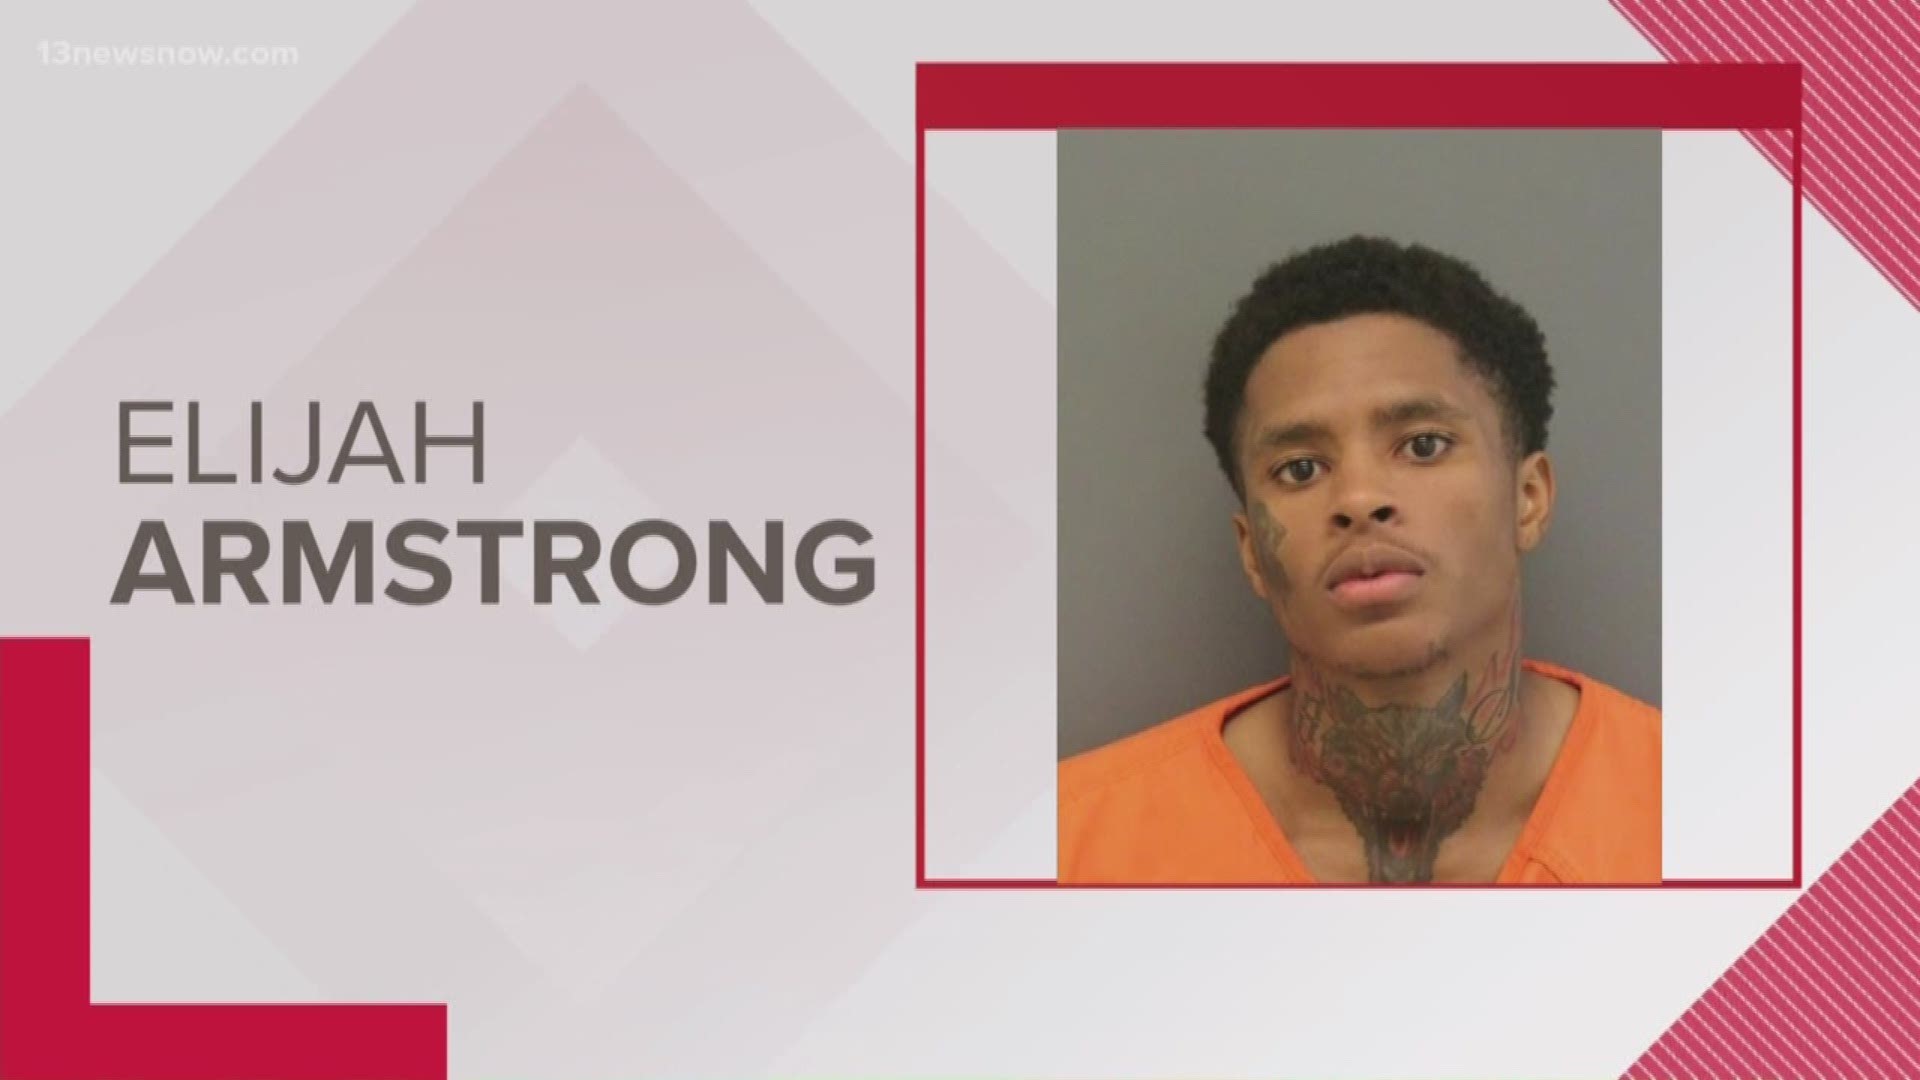 Police said Elijah Armstrong killed a man at a gas station in Denbigh. He's accused of shooting and killing a ride-share driver in Hampton within hours of that.